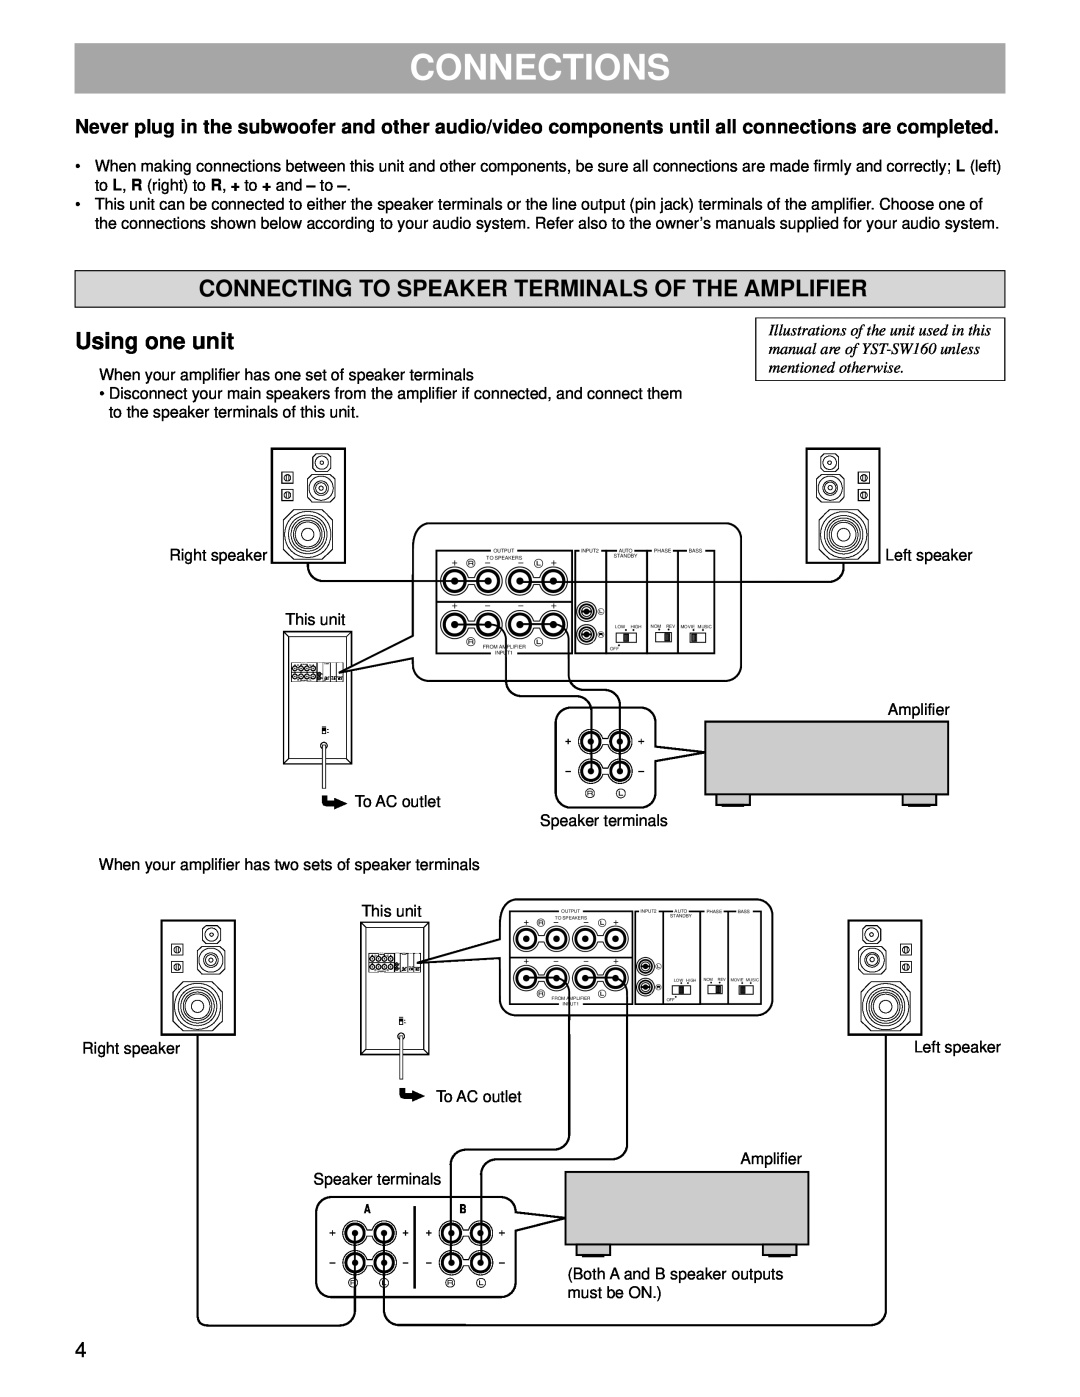 Yamaha YST-SW160/90 owner manual Connections, Connecting To Speaker Terminals Of The Amplifier, Using one unit 